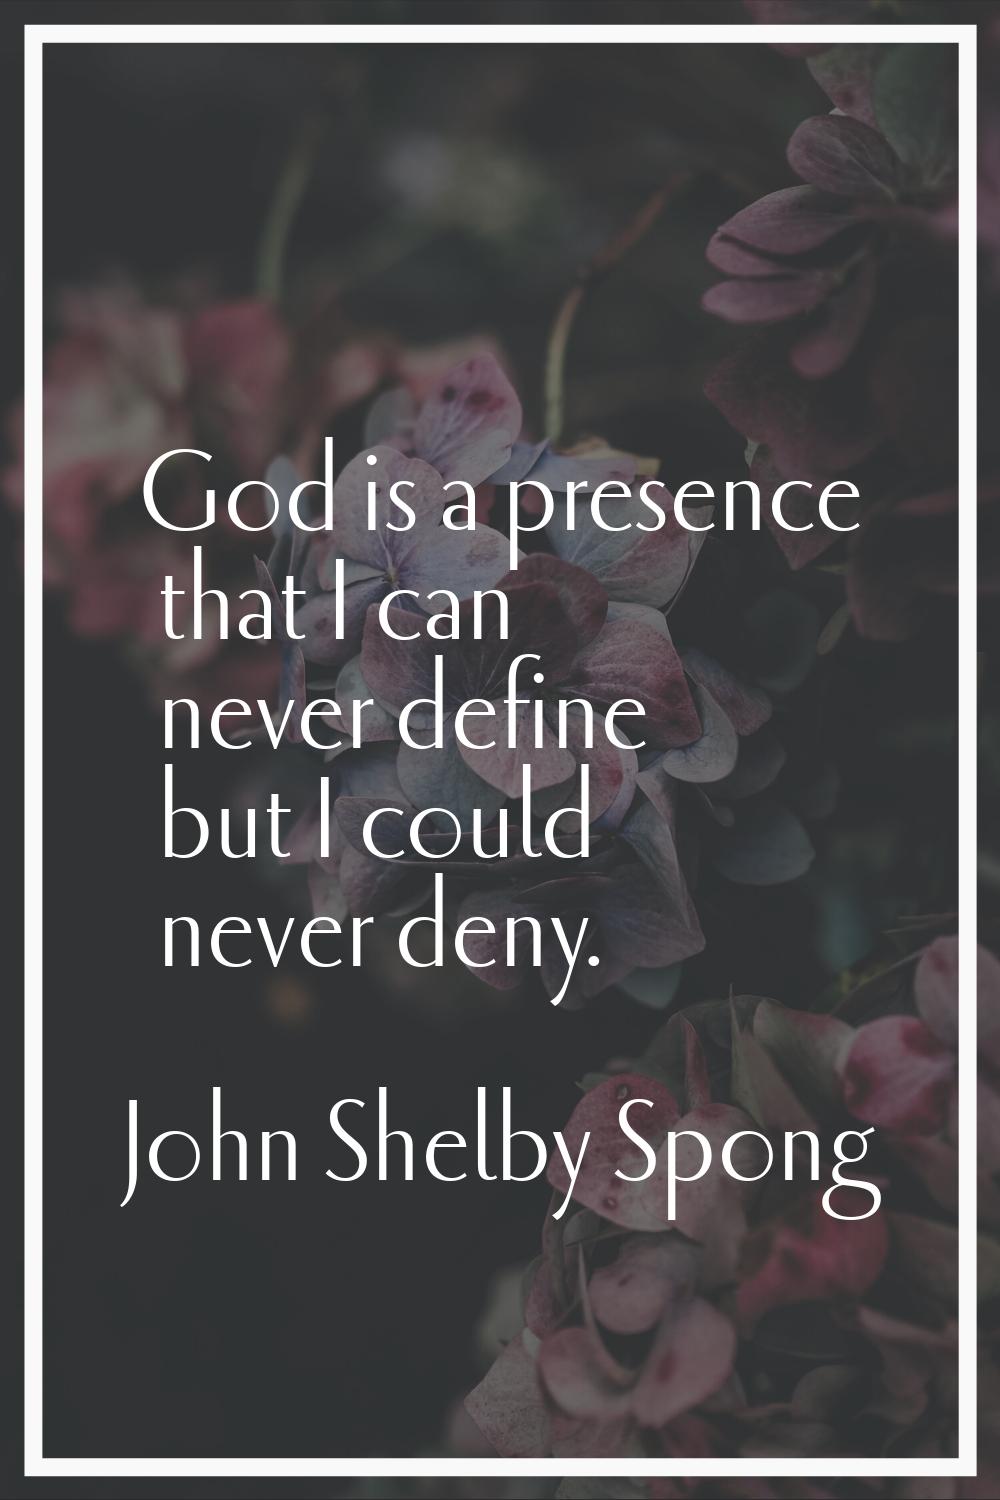 God is a presence that I can never define but I could never deny.